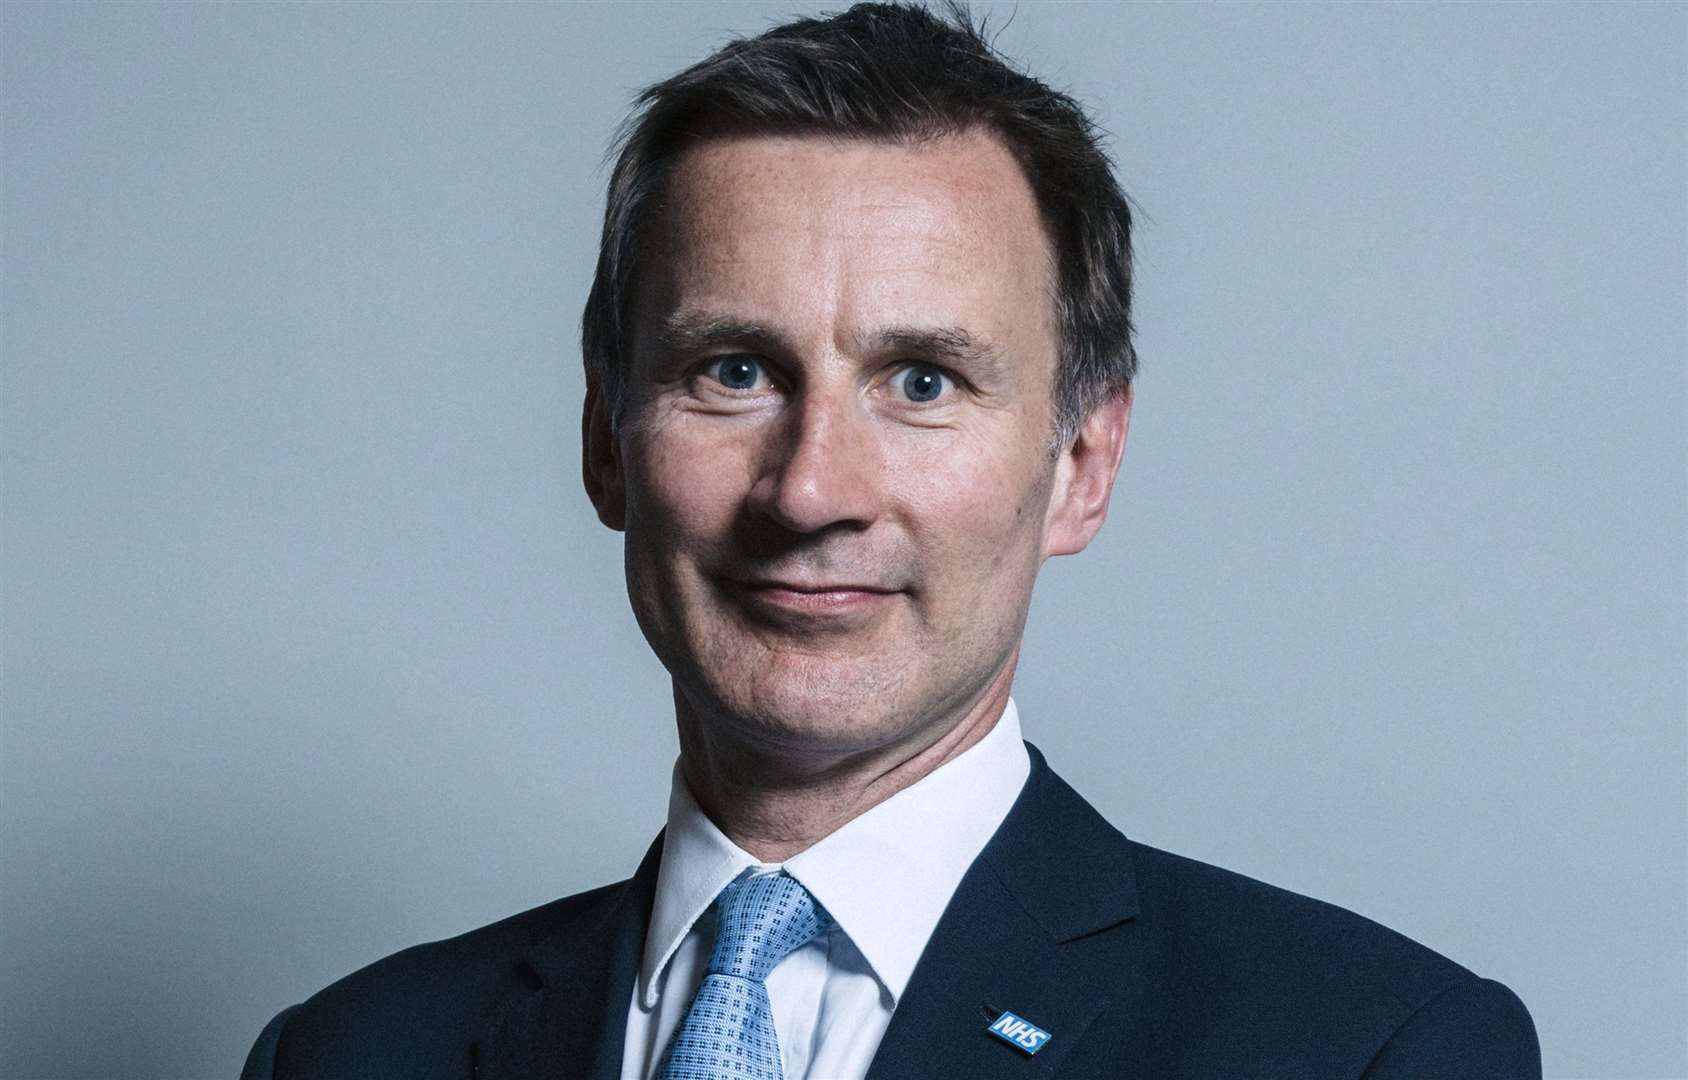 Chancellor Jeremy Hunt says he continues to work towards a ‘high growth, low inflation economy’